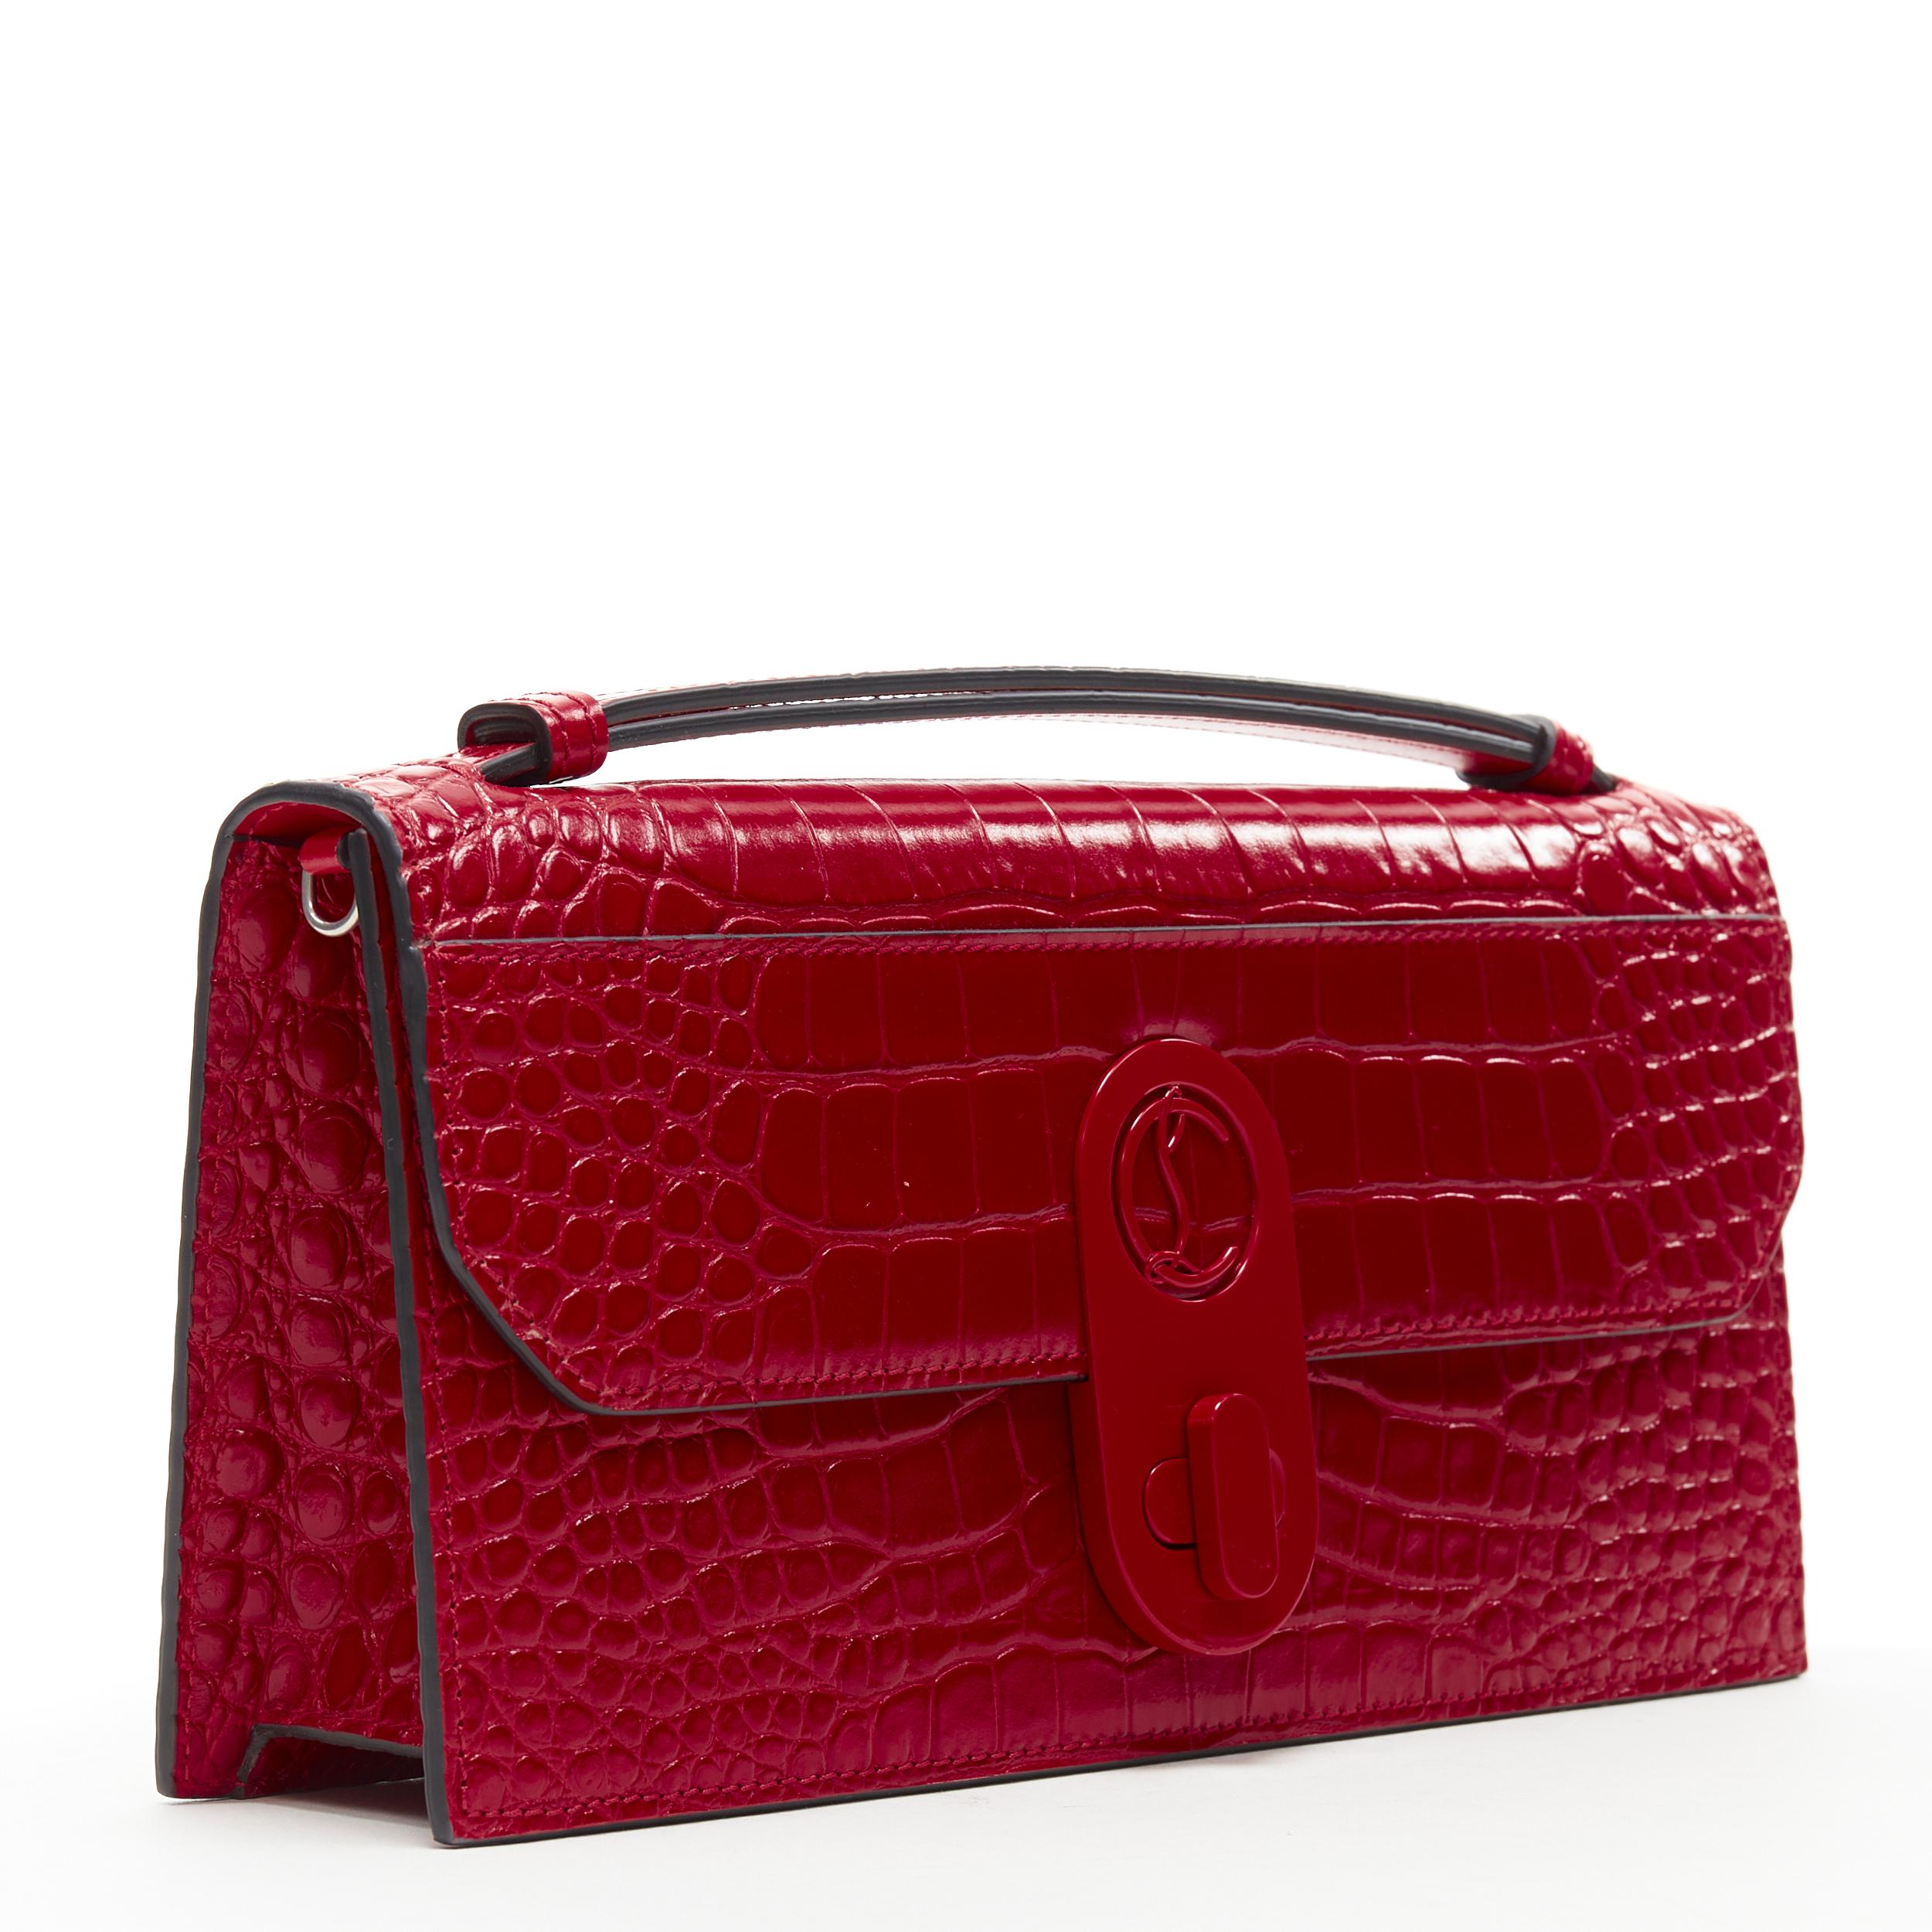 Red new CHRISTIAN LOUBOUTIN Elisa Baguetta stamped croc calf leather clutch bag